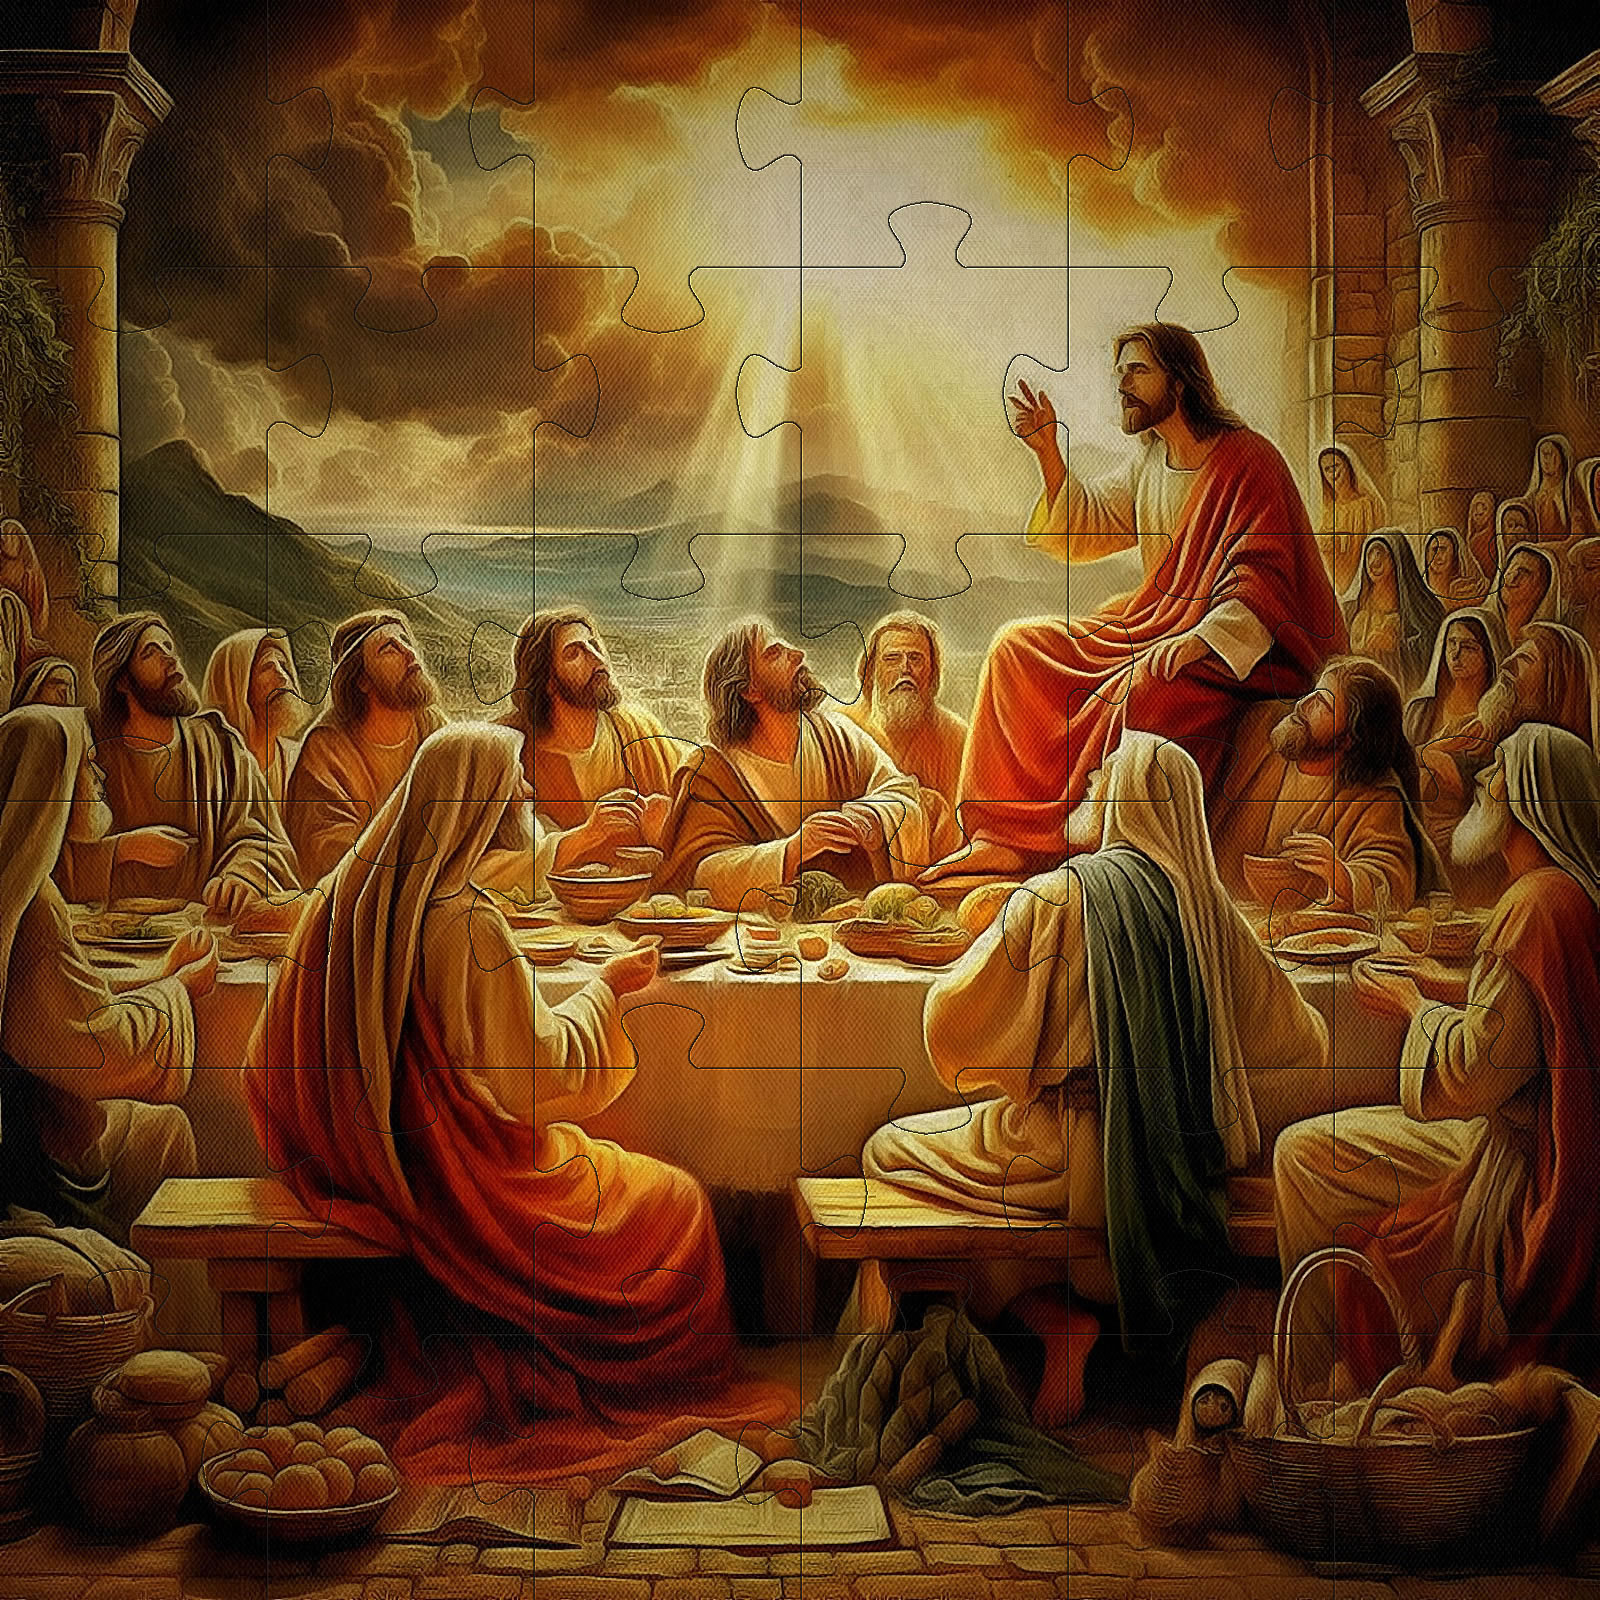 Jigsaw Version of Imaginary Bible Story Scene with Jesus Preaching to his Apostles